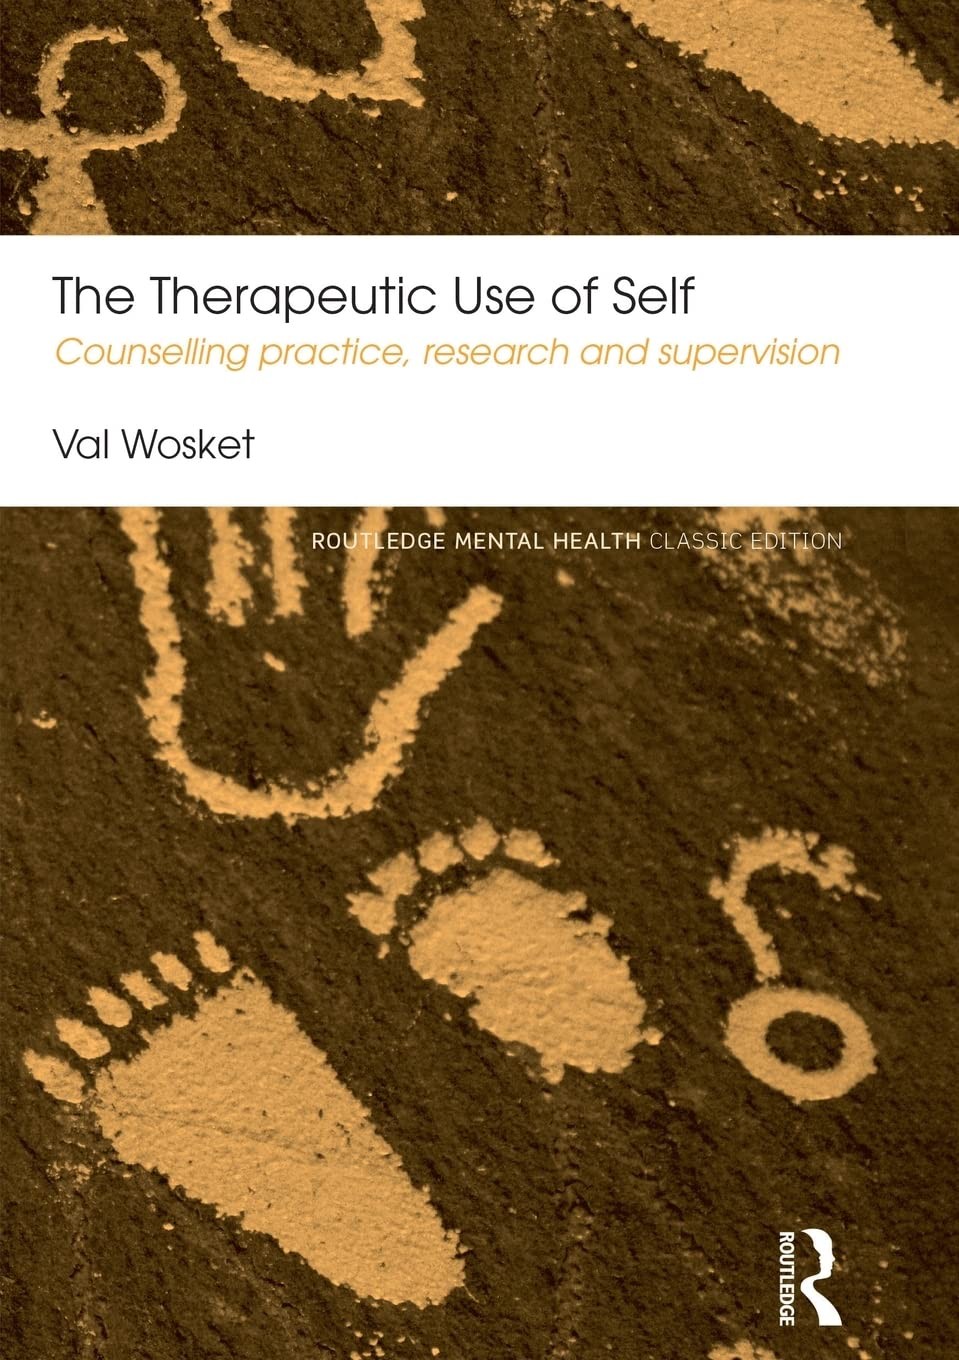 The Therapeutic Use of Self: Counselling Practice, Research, and Supervision